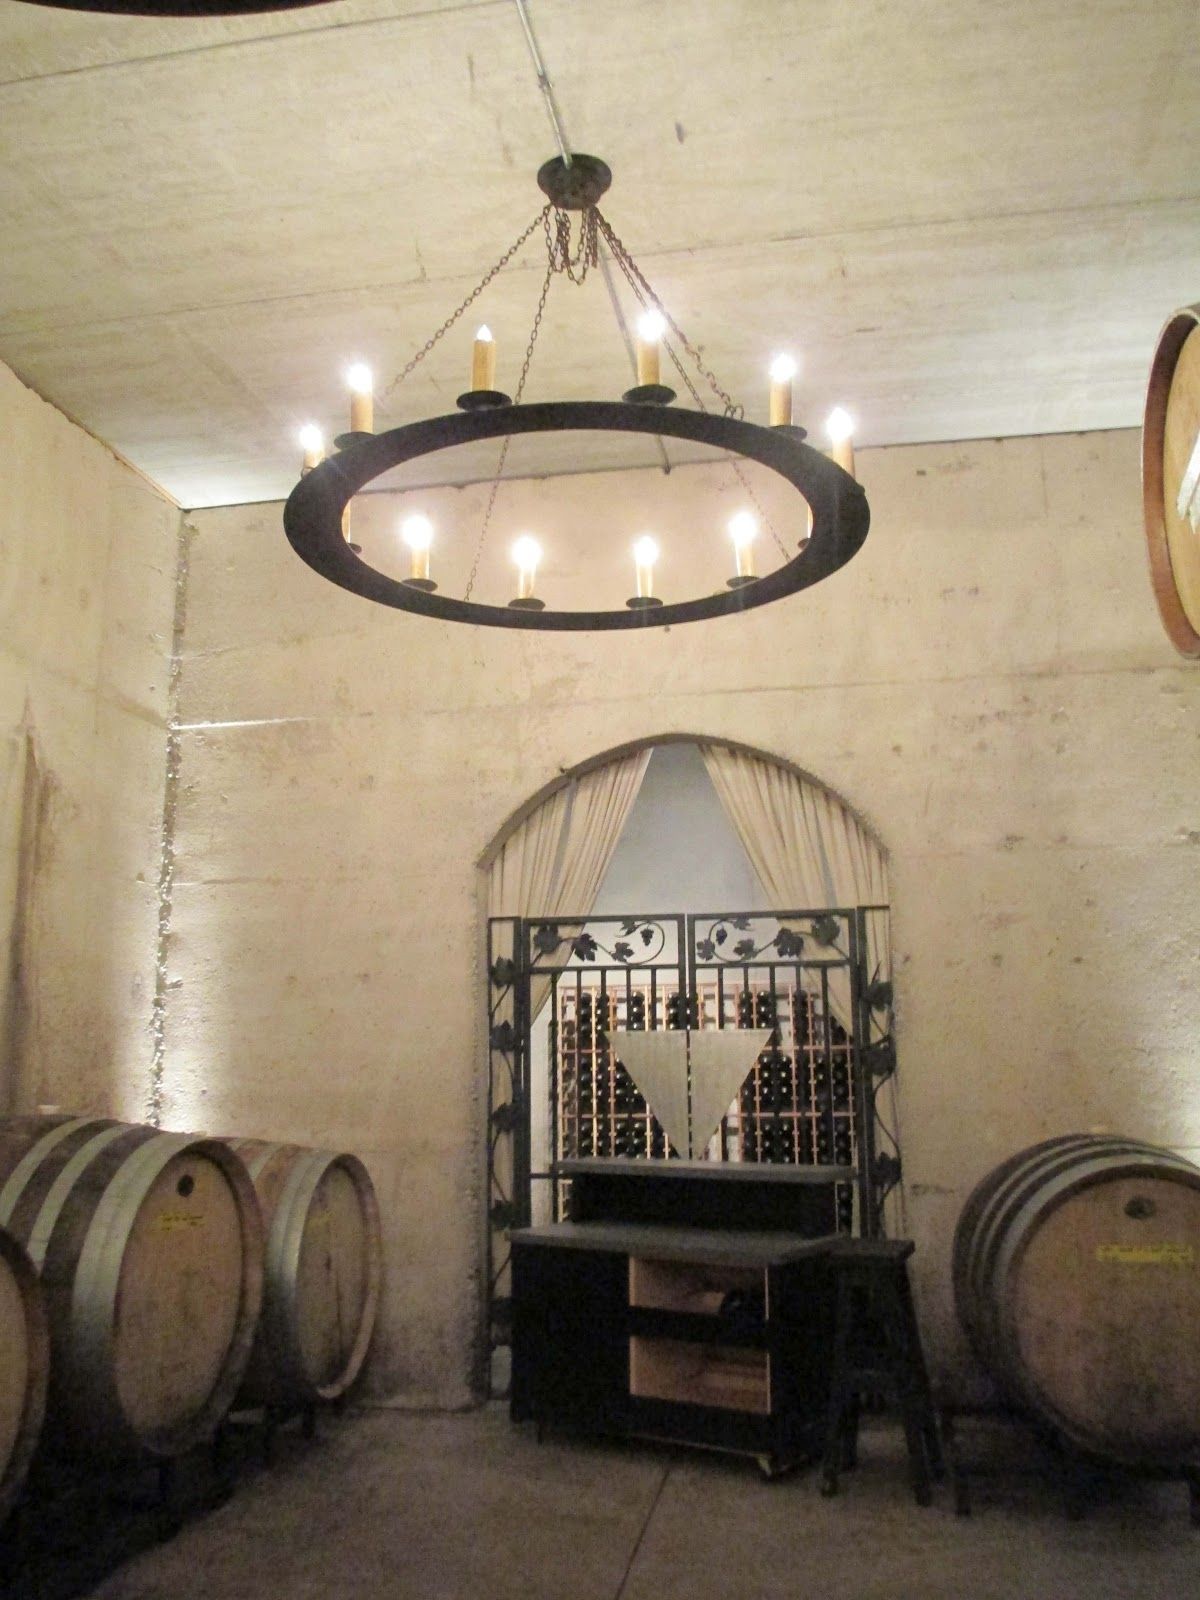 2017 Ideas: Wine Garage Design With Round Wine Barrel Chandelier And Pertaining To Wine Barrel Wall Art (View 2 of 15)